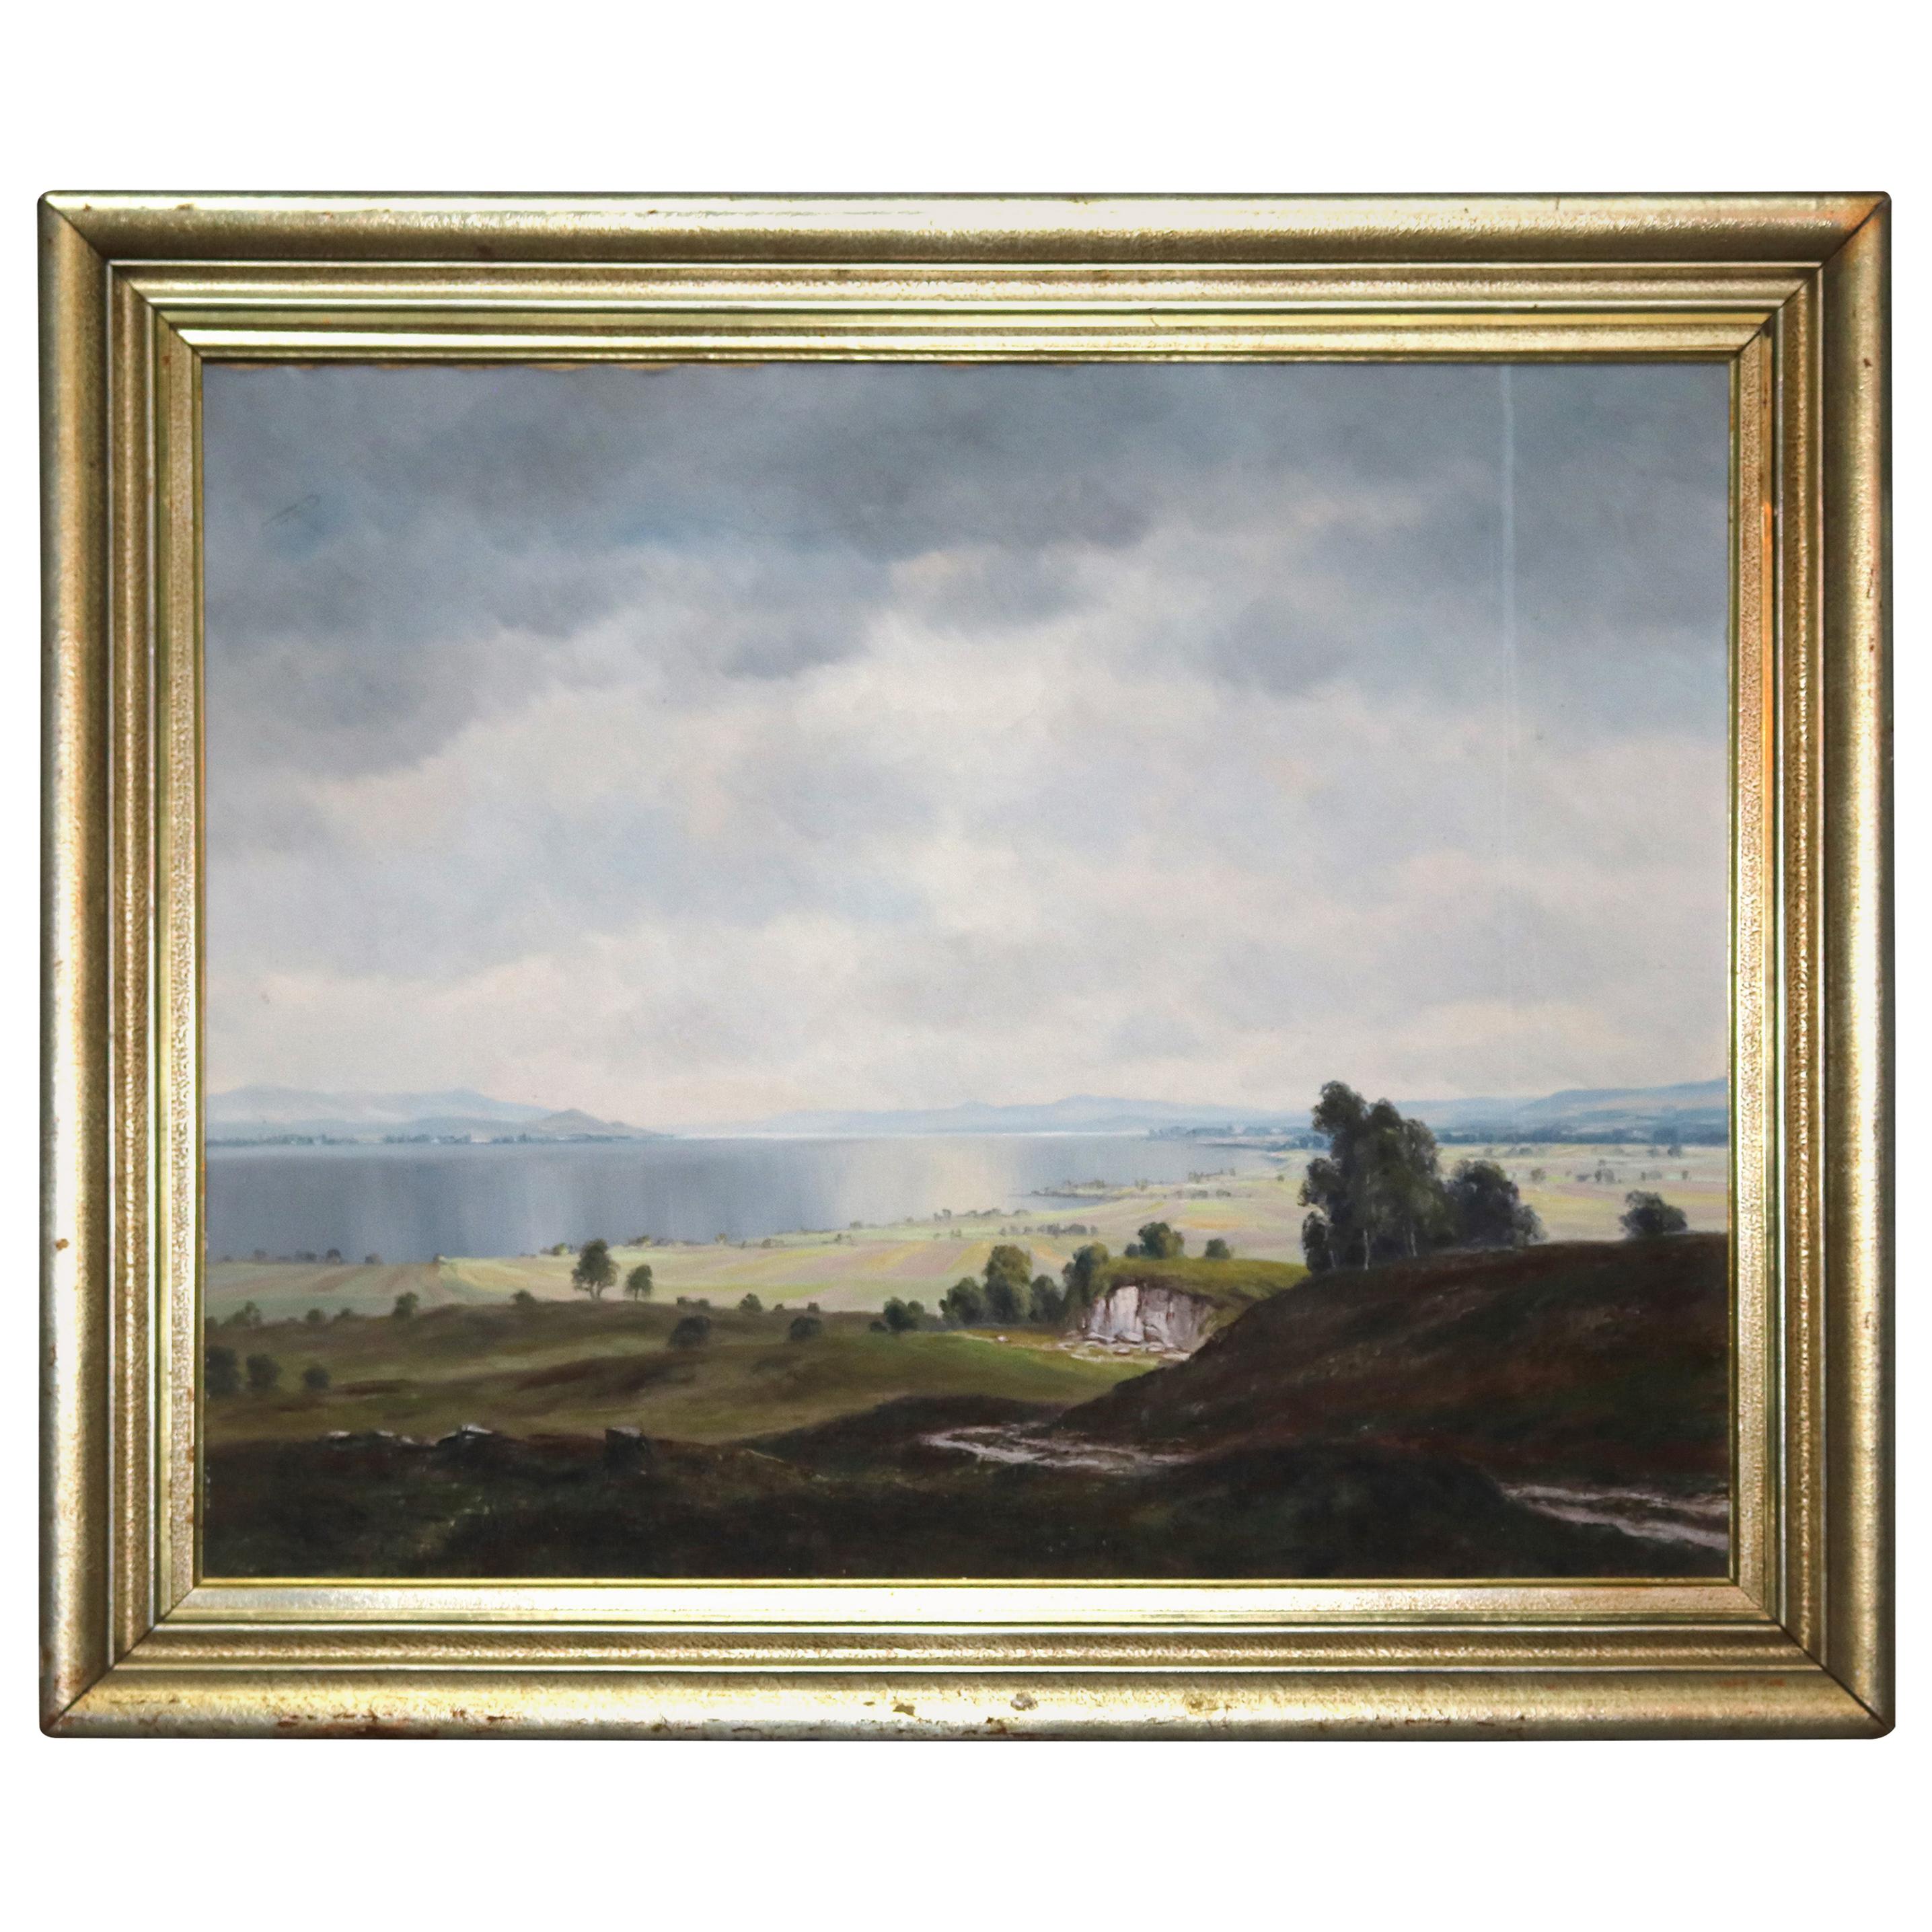 Painting, Landscape Oil on Canvas, Manner of Hudson River School, circa 1930